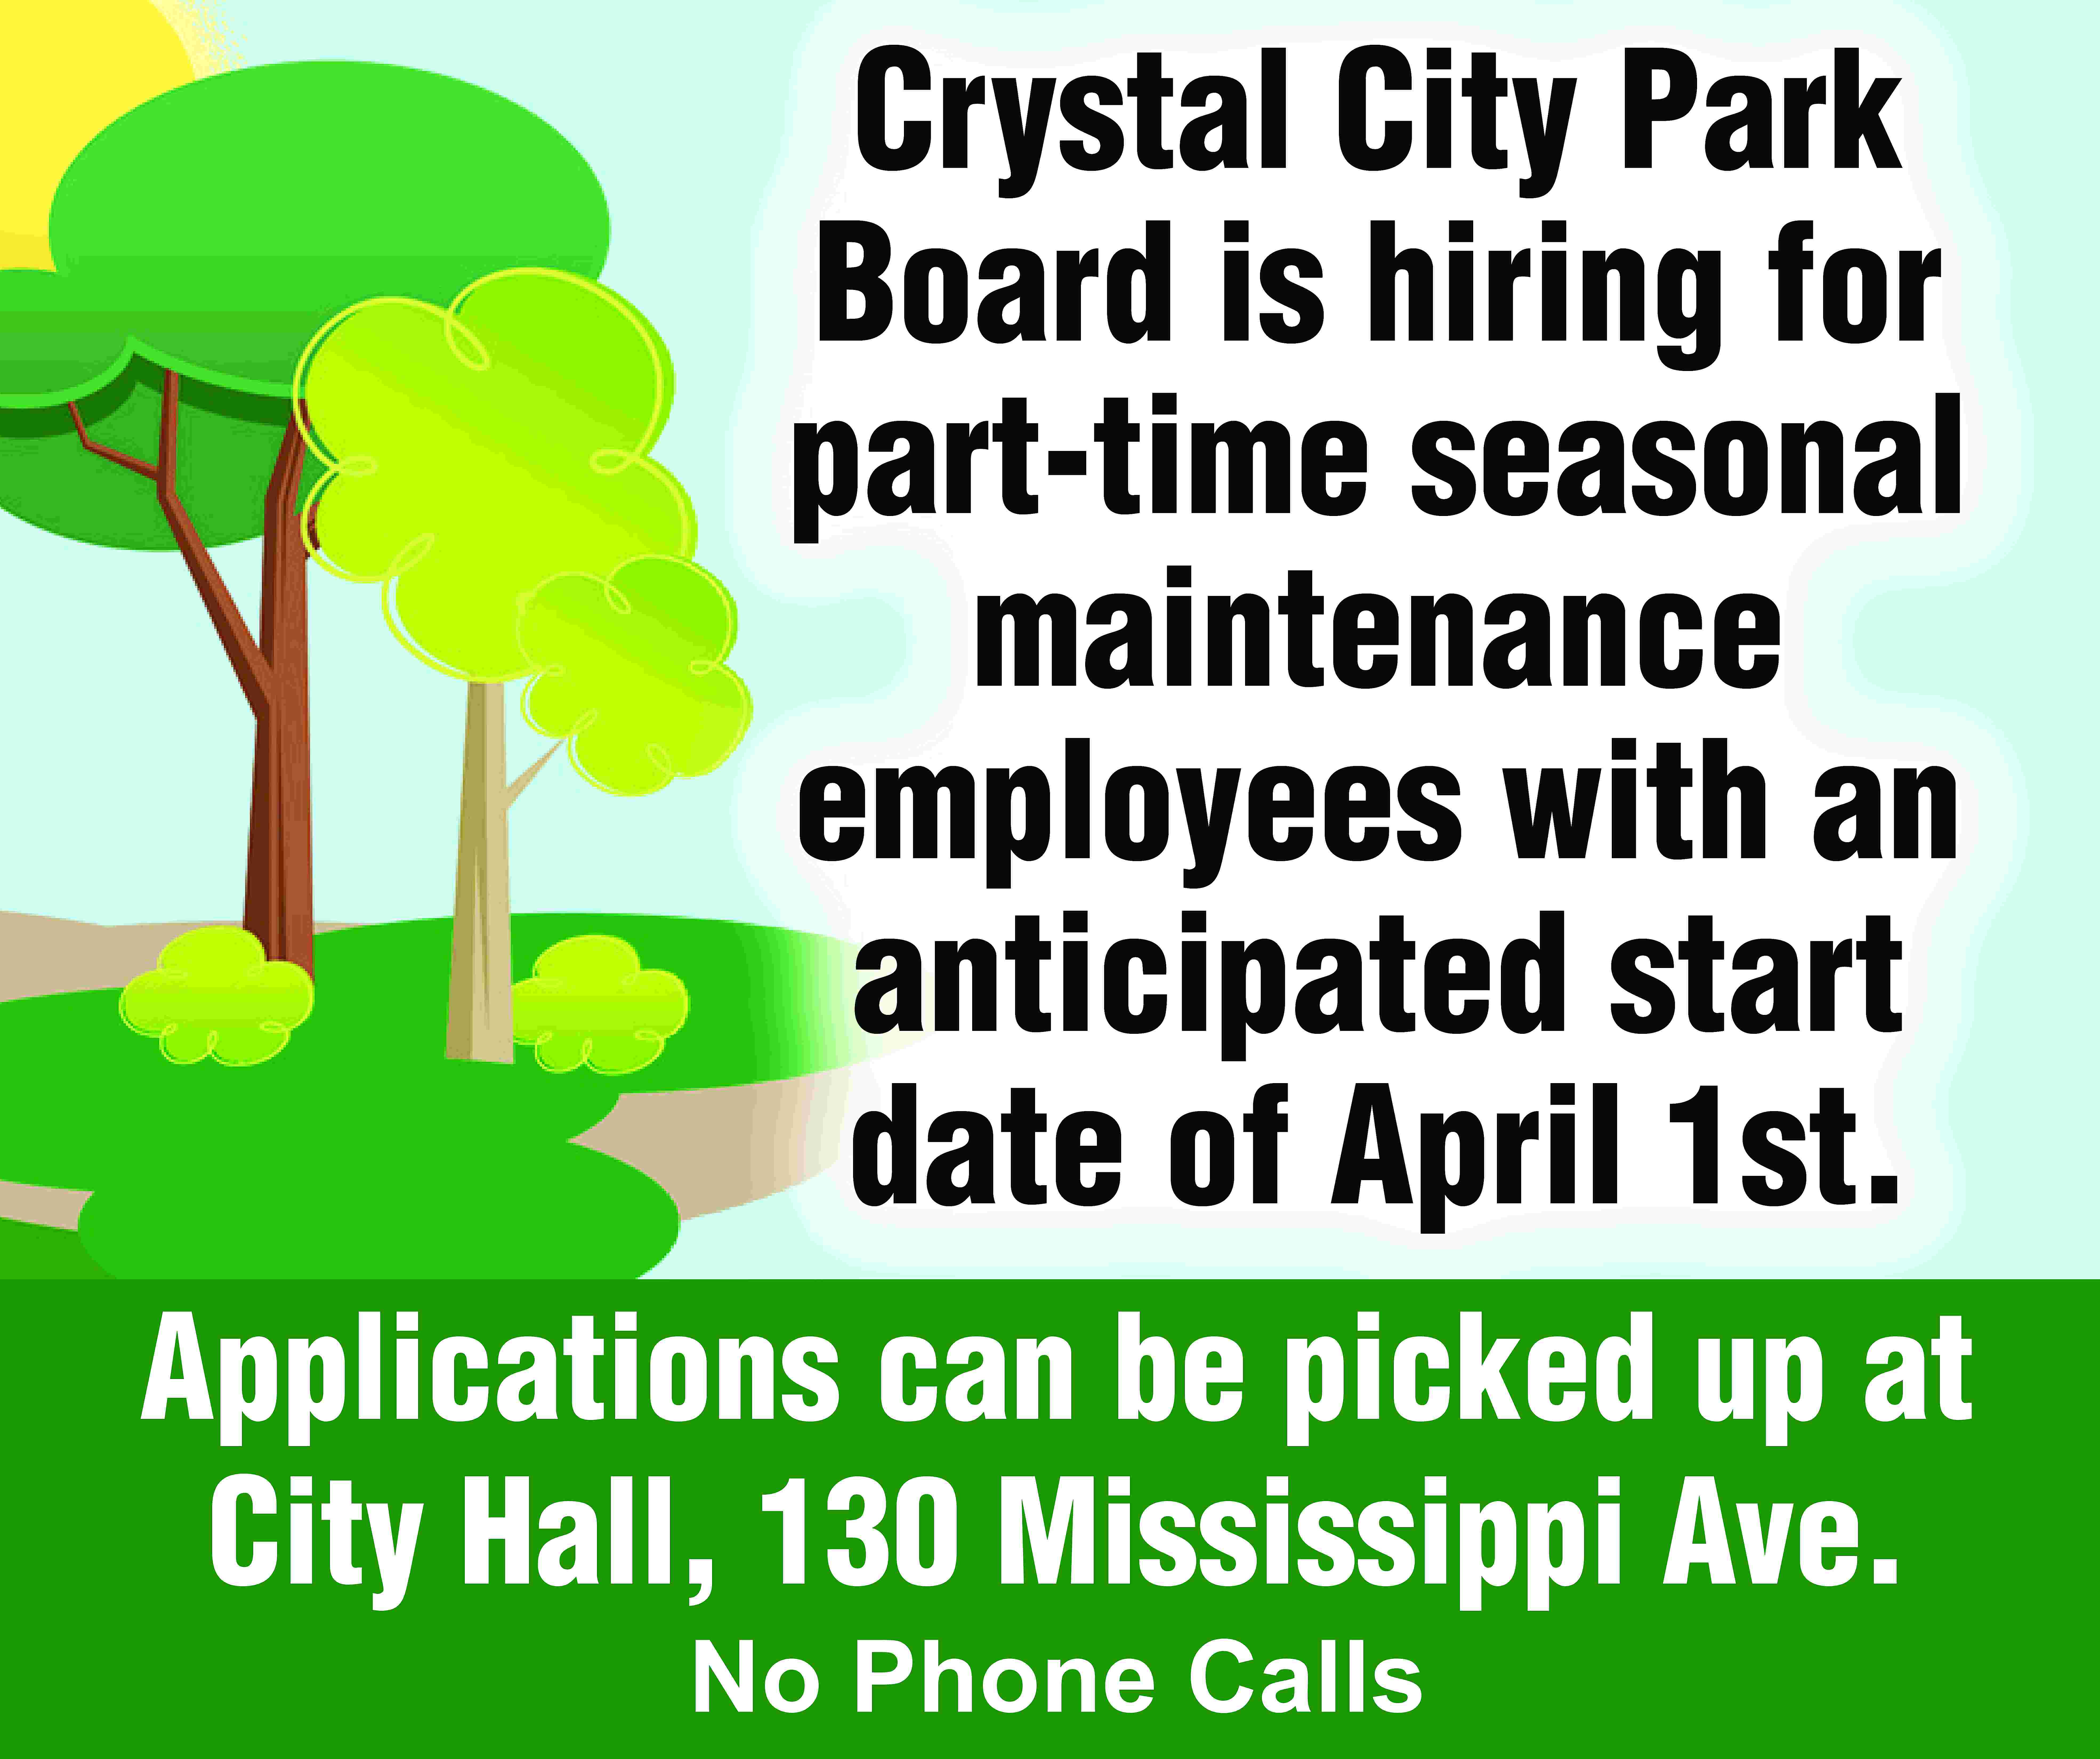 Crystal City Park Board is  Crystal City Park Board is hiring for part-time seasonal maintenance employees with an anticipated start date of April 1st. Applications can be picked up at City Hall, 130 Mississippi Ave. No Phone Calls